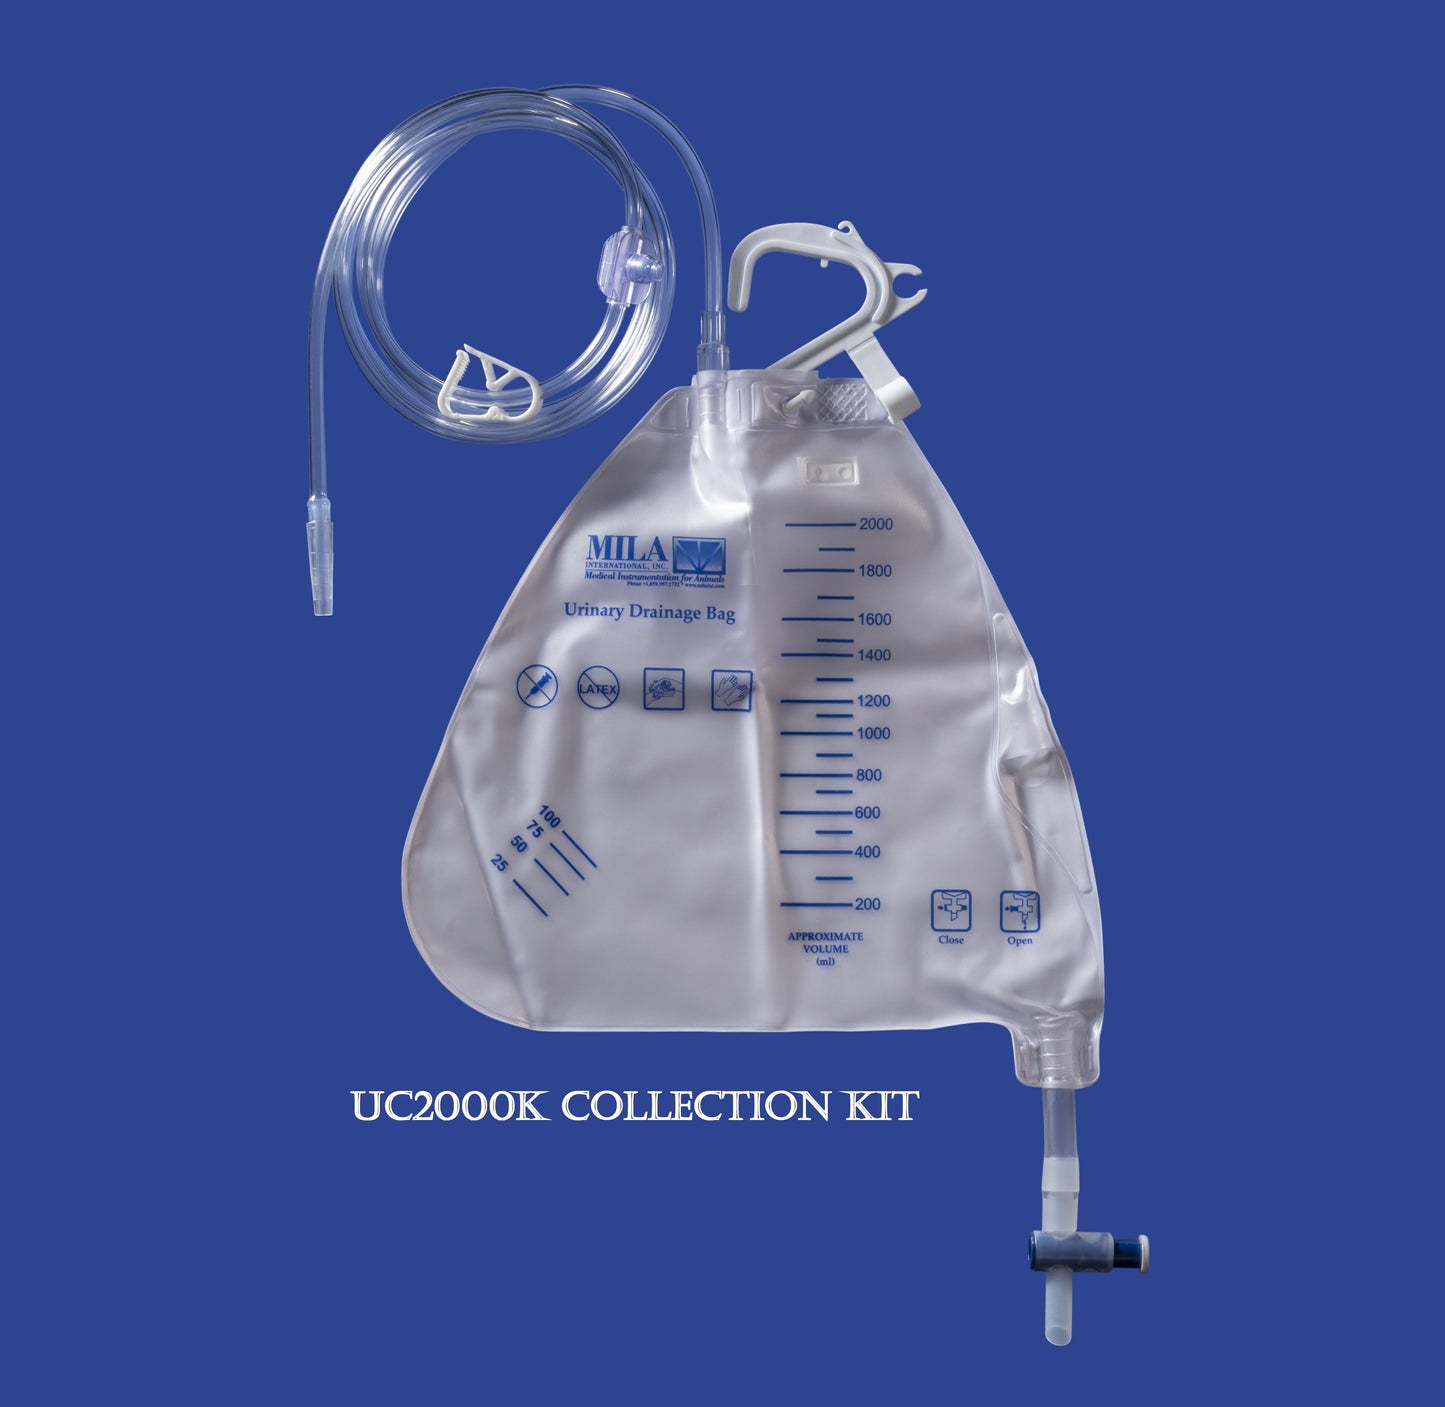 Closed System Urine Collection Kits and Replacement Bags